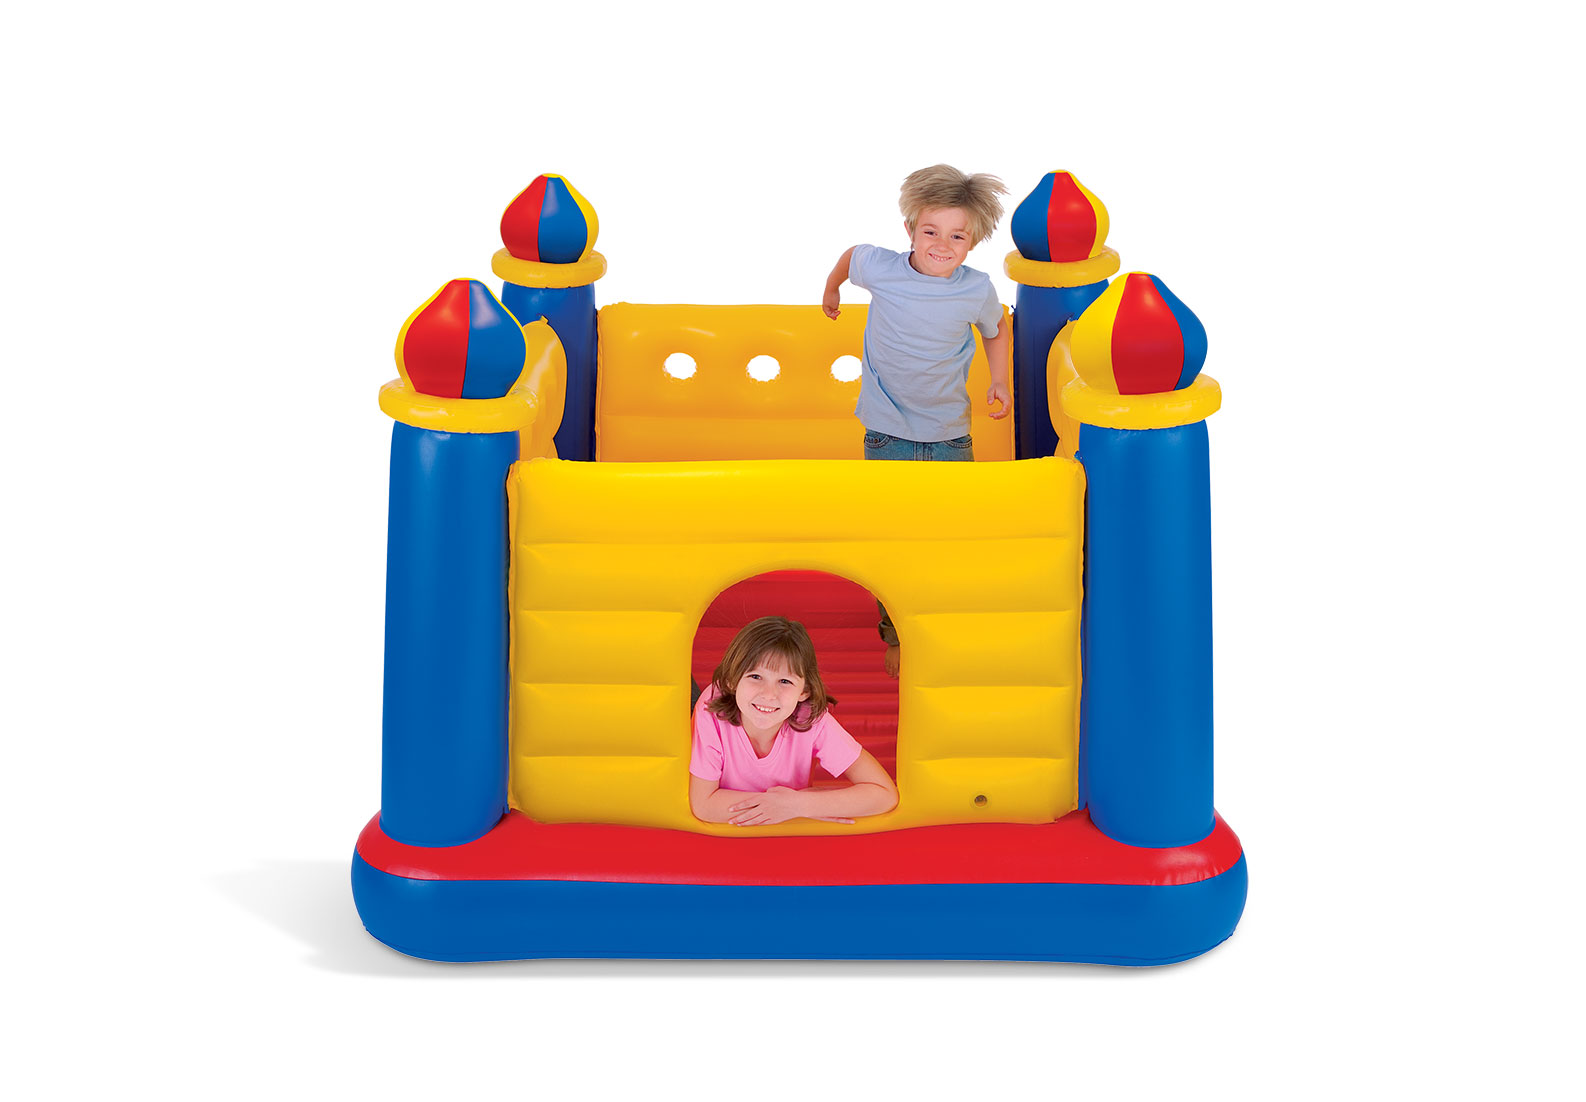 Intex Inflatable Colorful Jump-O-Lene Kids Ball Pit Castle Bouncer for Ages 3-6 - image 2 of 7